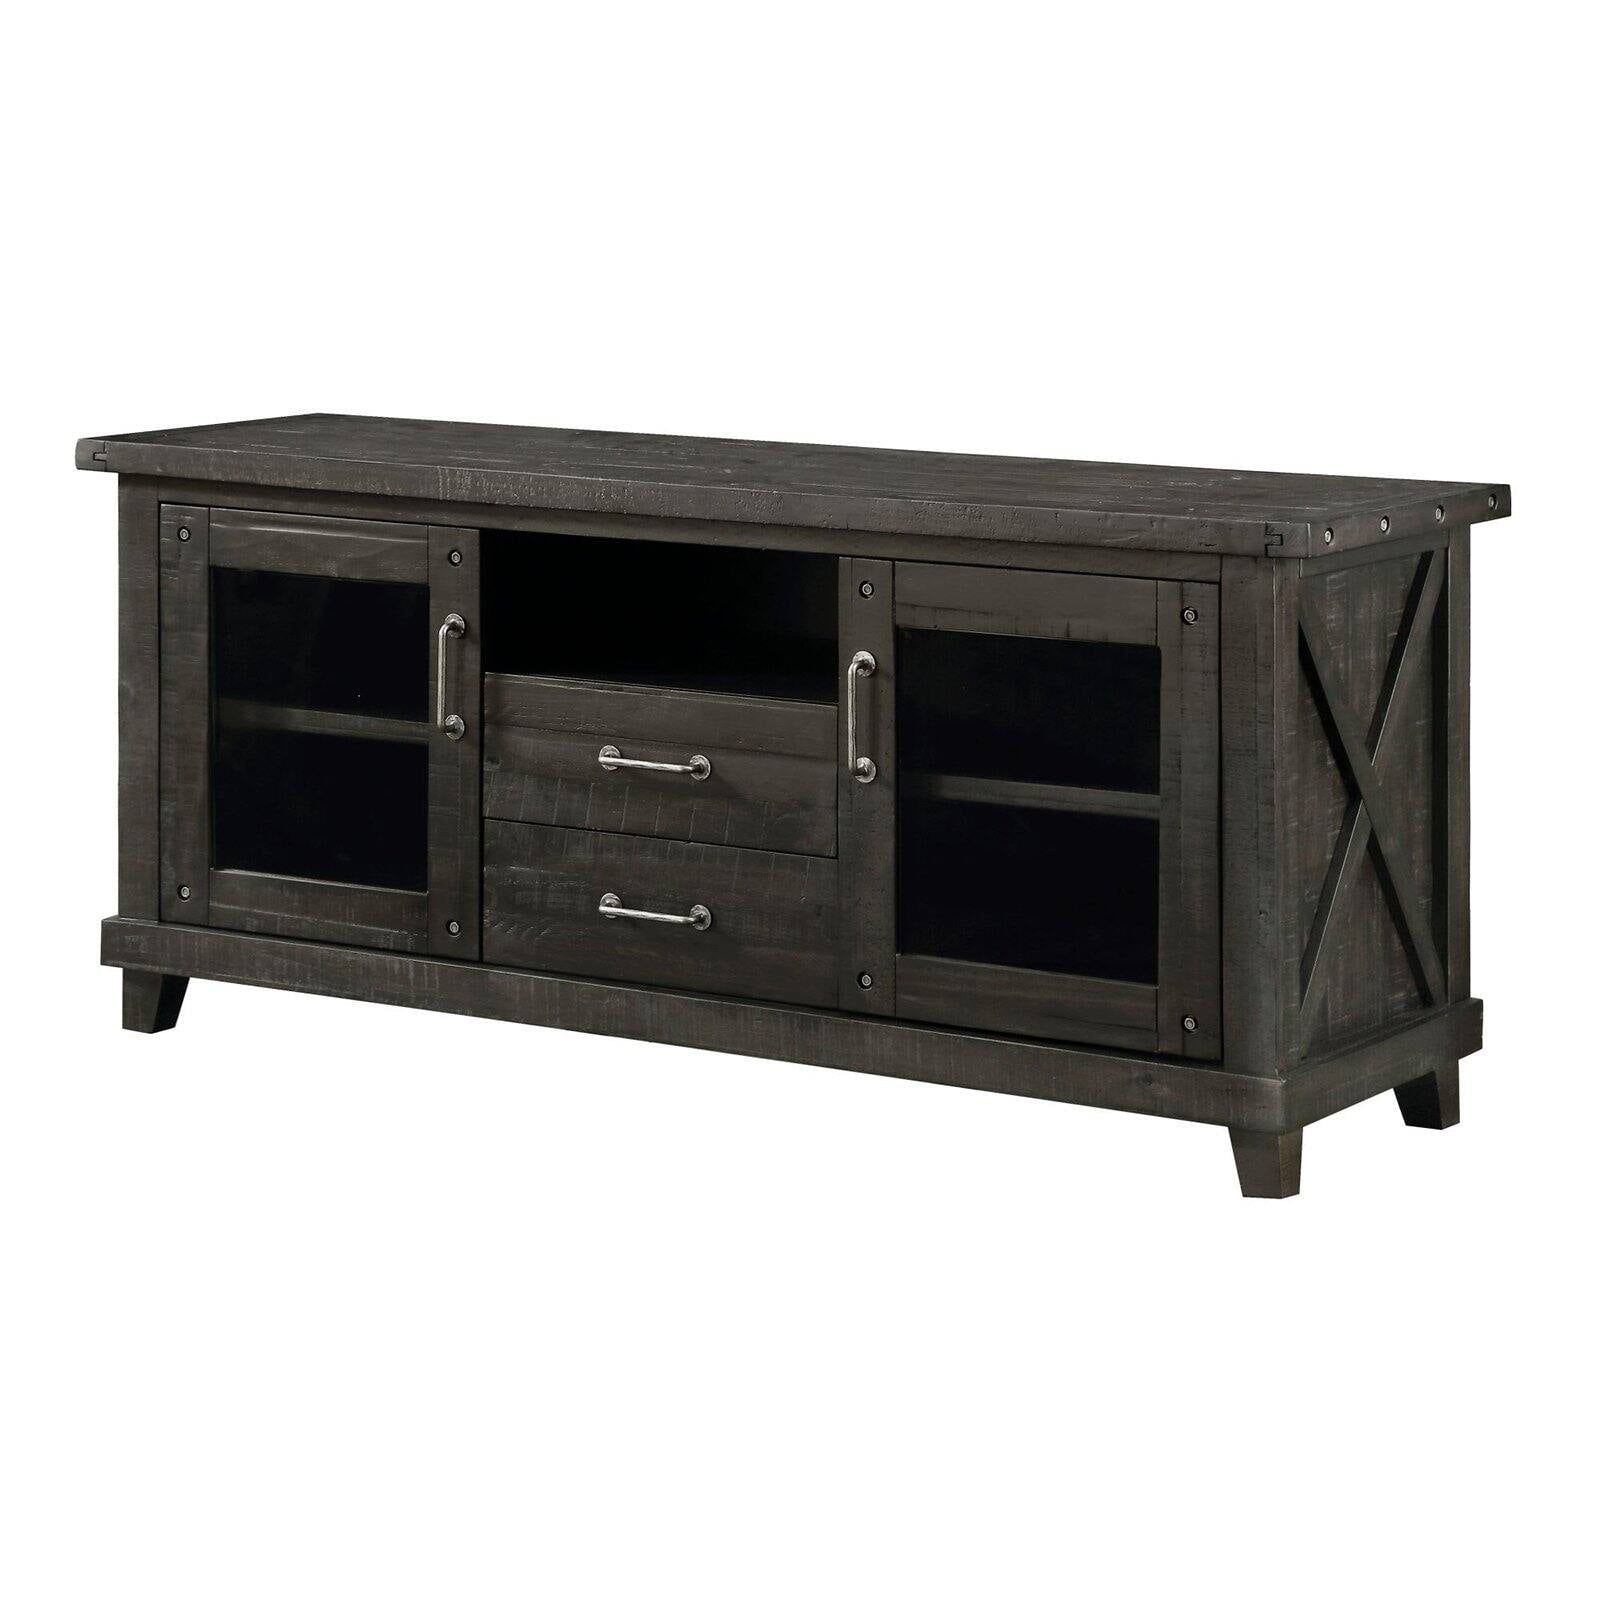 Modus Yosemite Media Console Tv Stand – Cafe – Walmart Intended For Cafe Tv Stands With Storage (Photo 11 of 15)